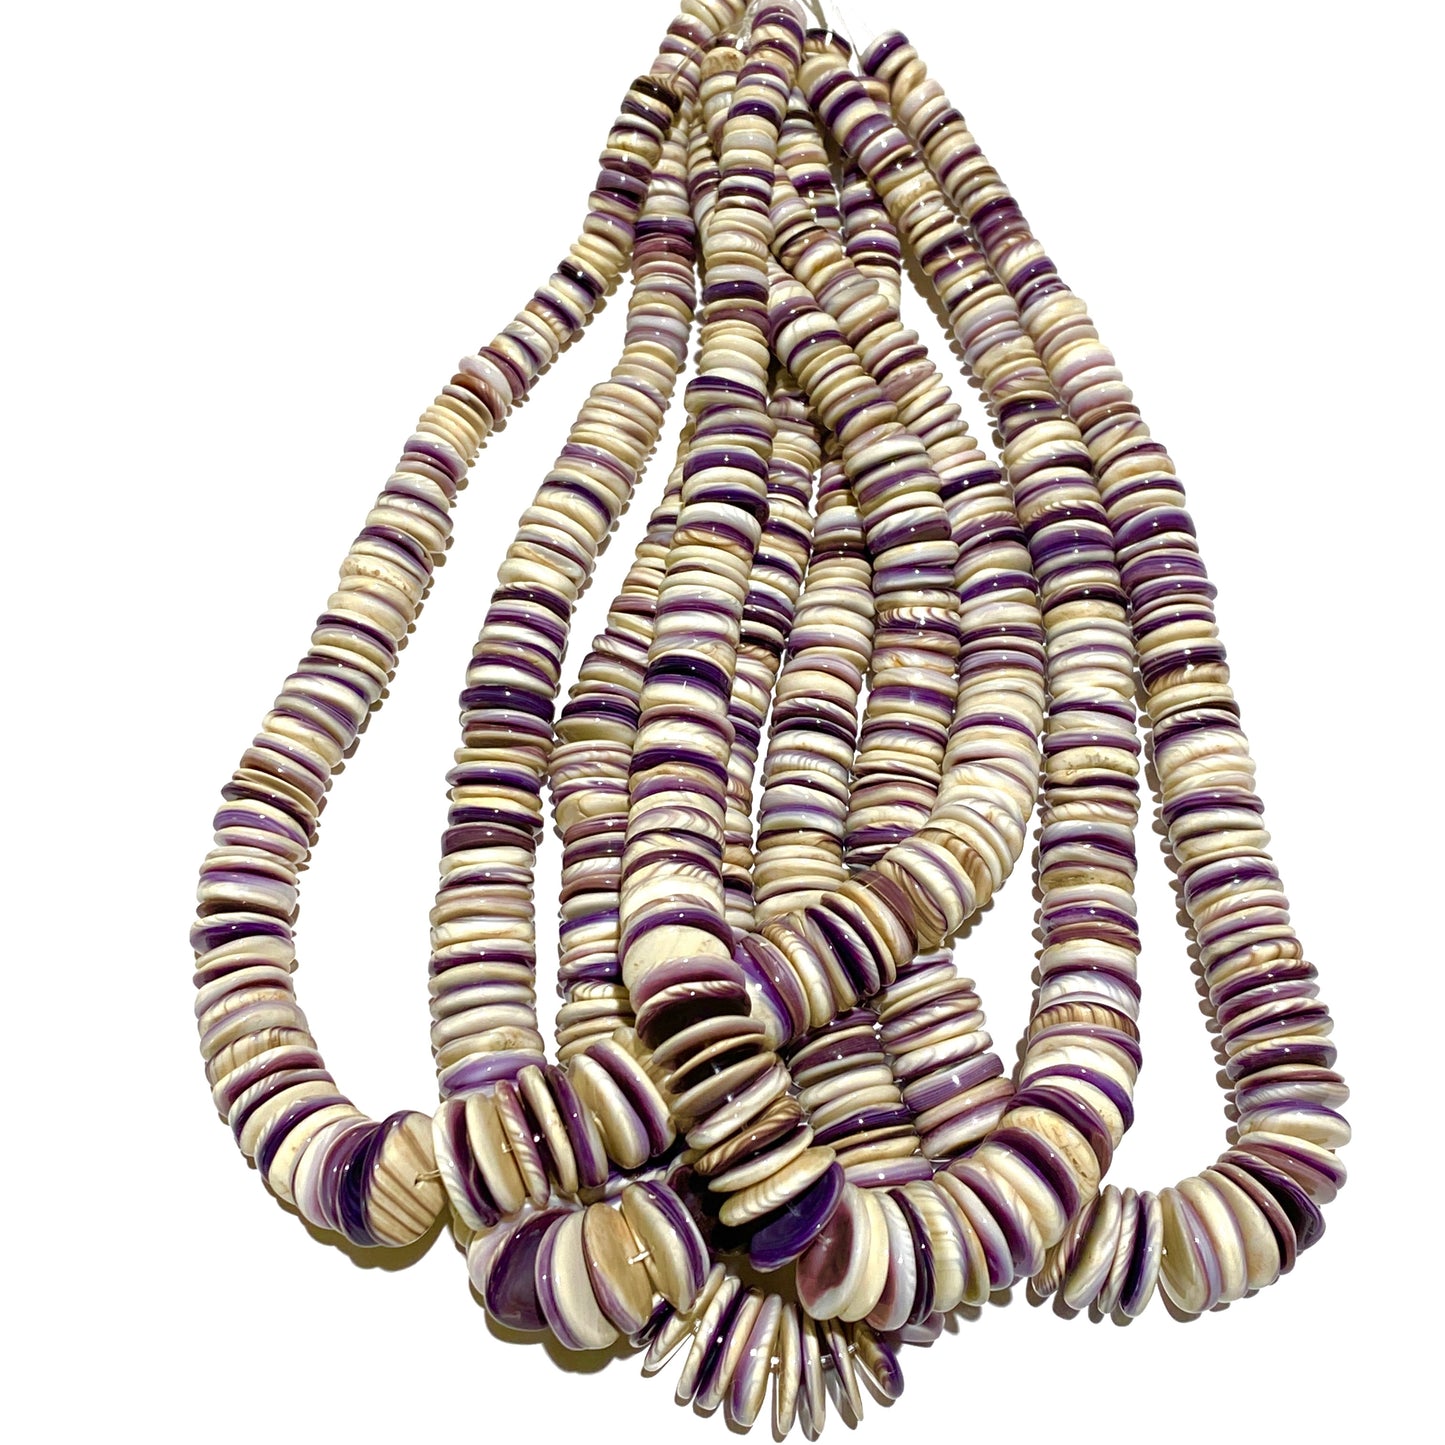 Gigantic Wampum Quahog Shell Beads From New England, USA (America's First Currency From Year 1637-1673) Natural Deep-Ocean Seashell, Rondelle, Heishi, Graduated, 15.5 Inches, 8-16mm